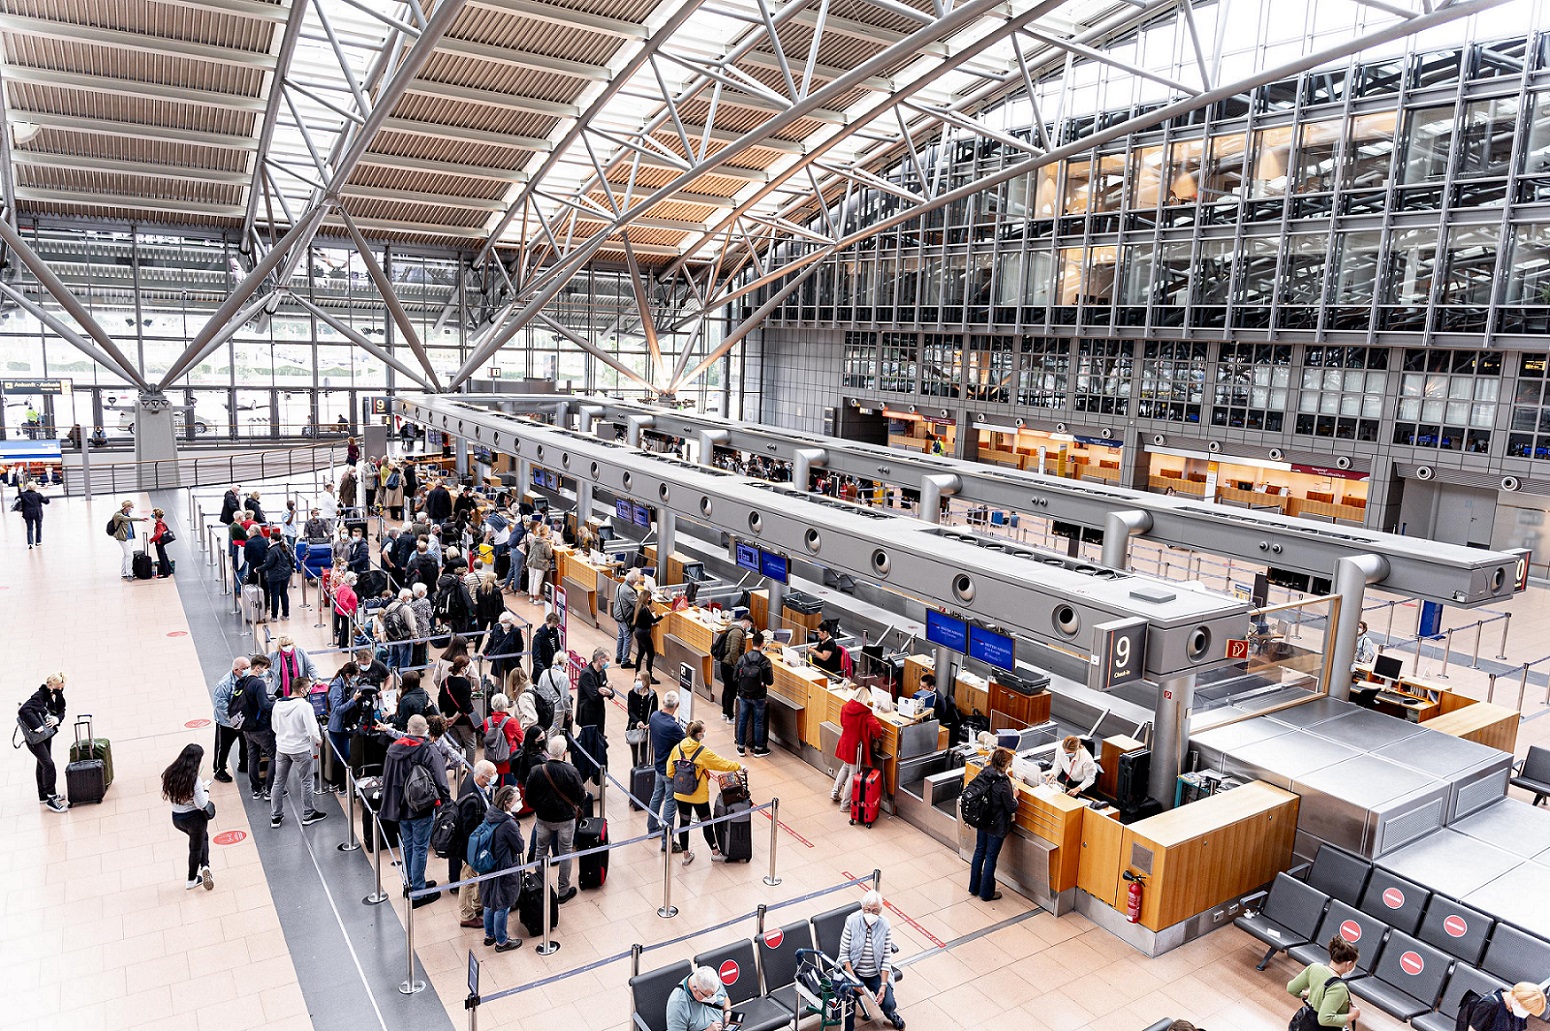 Hamburg Airport uses Amadeus cloud technology to streamline IT services